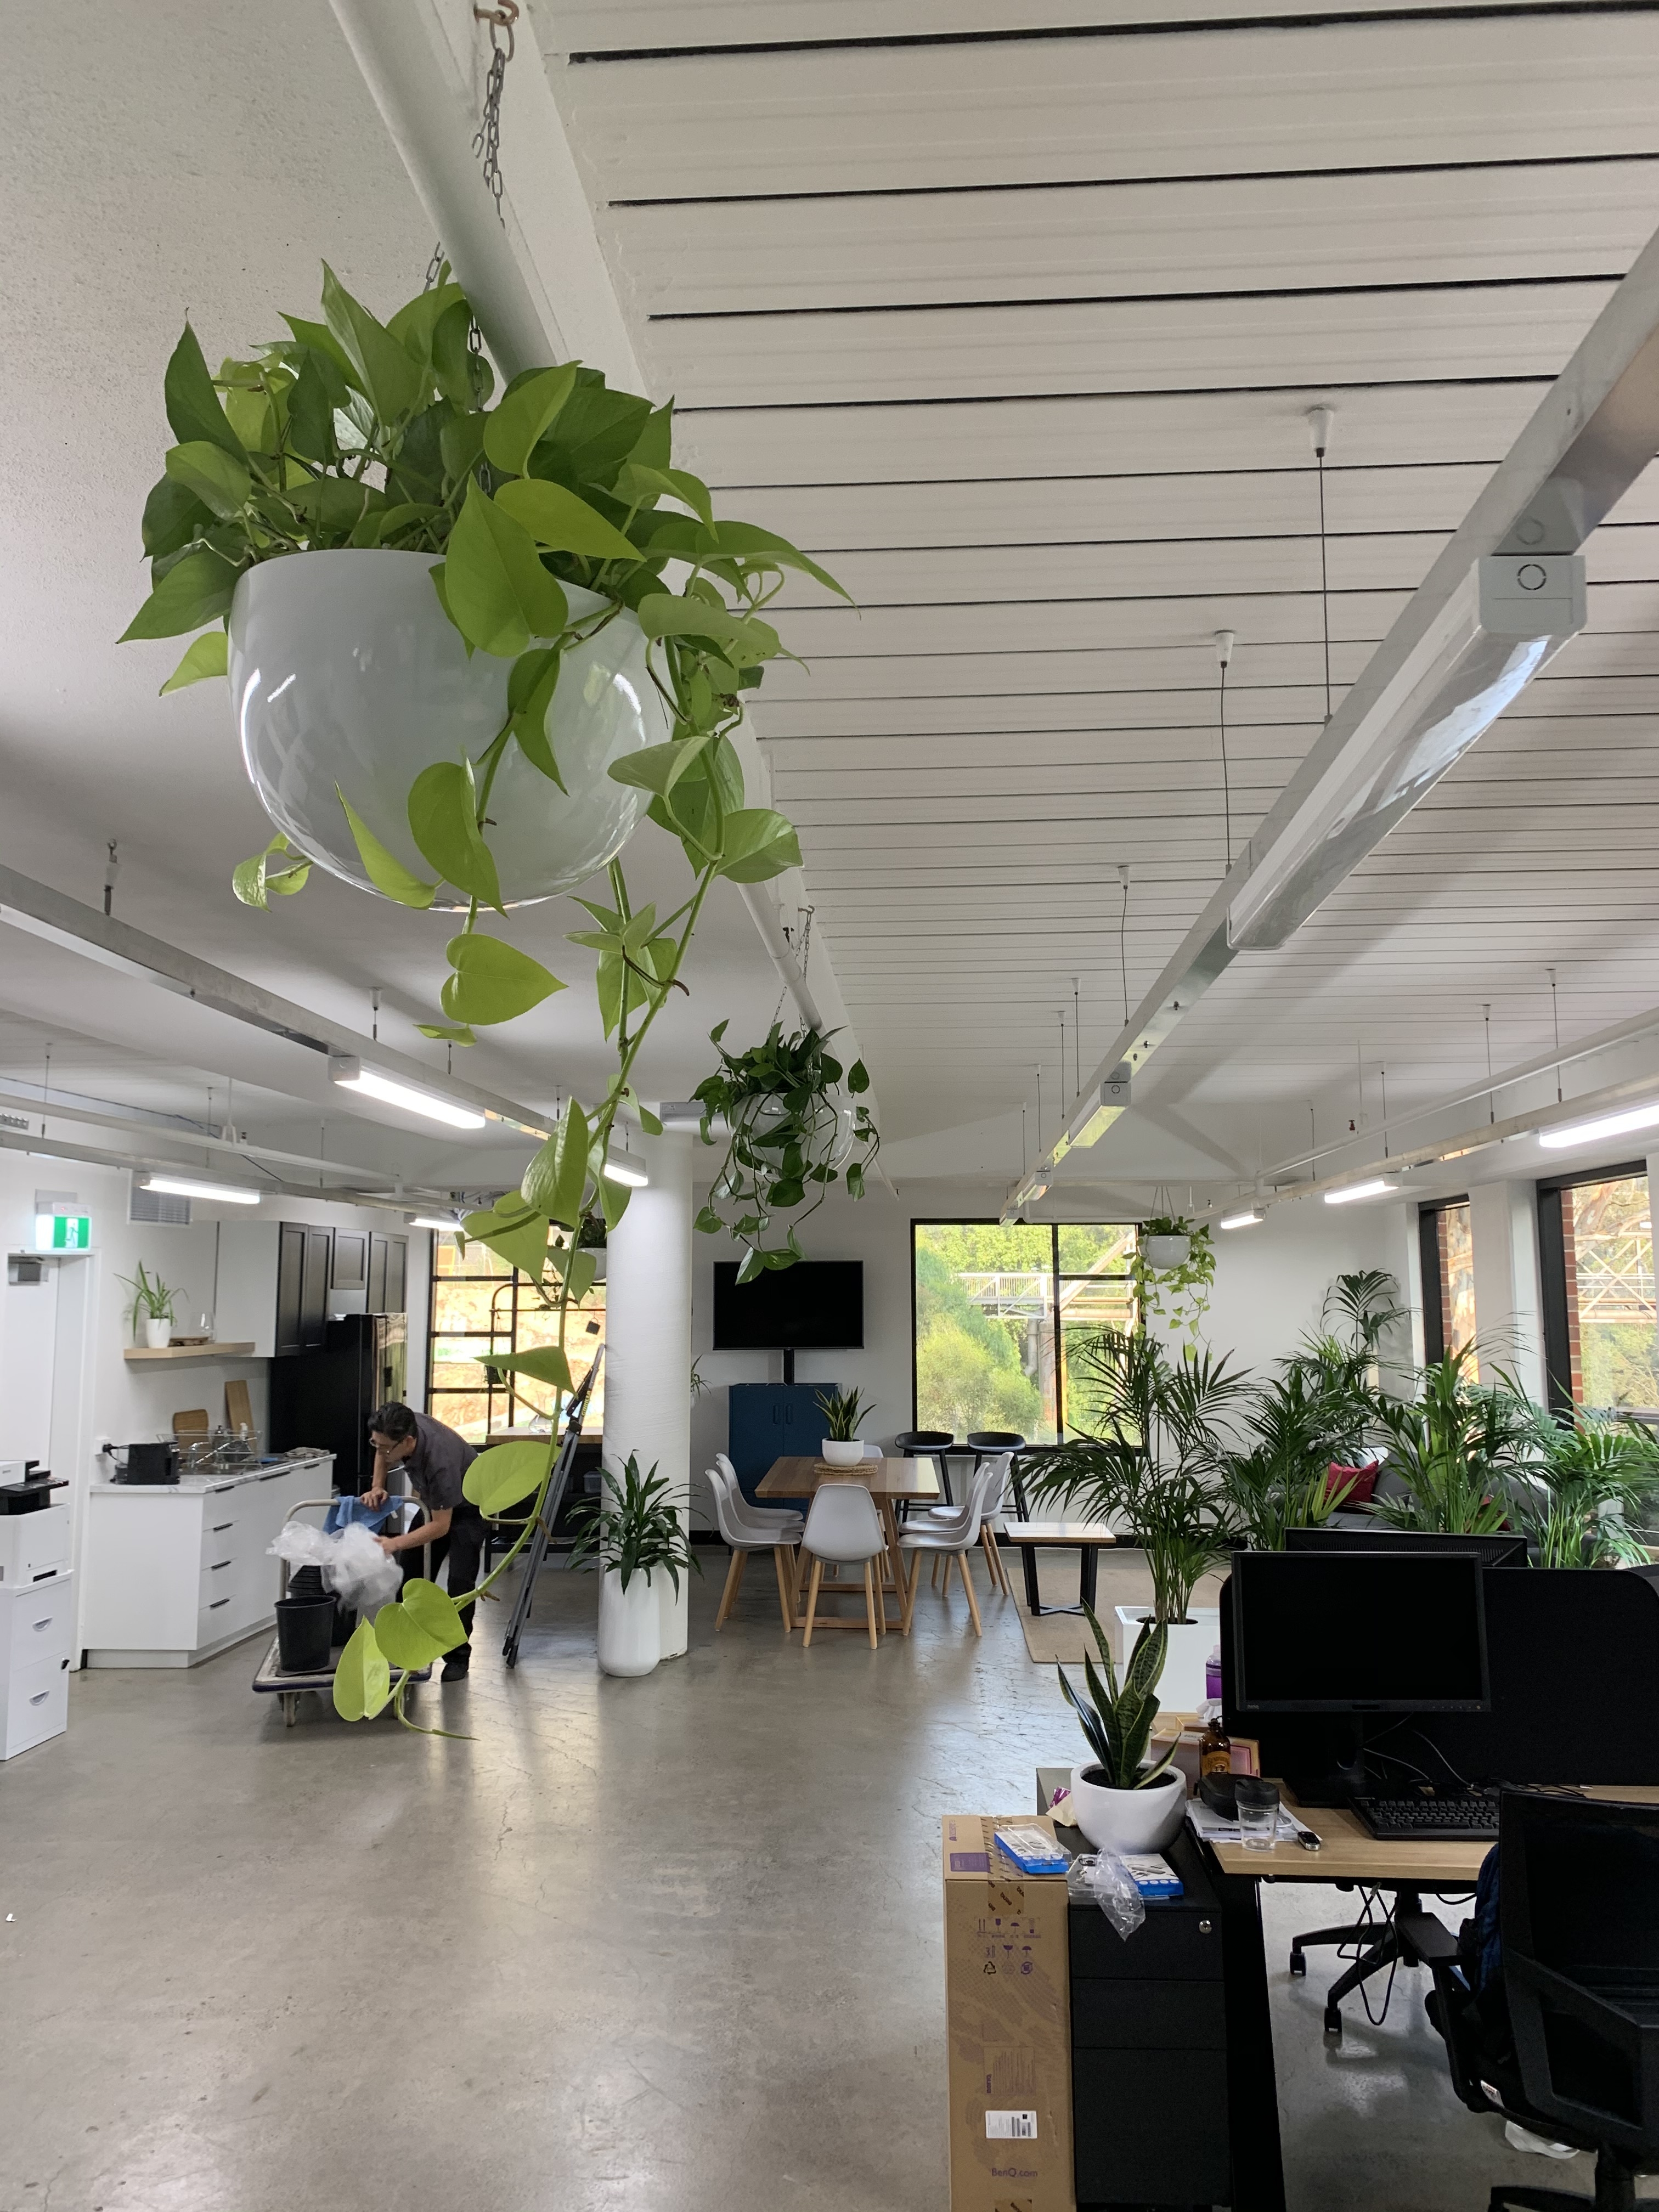 Hanging Planters in Office